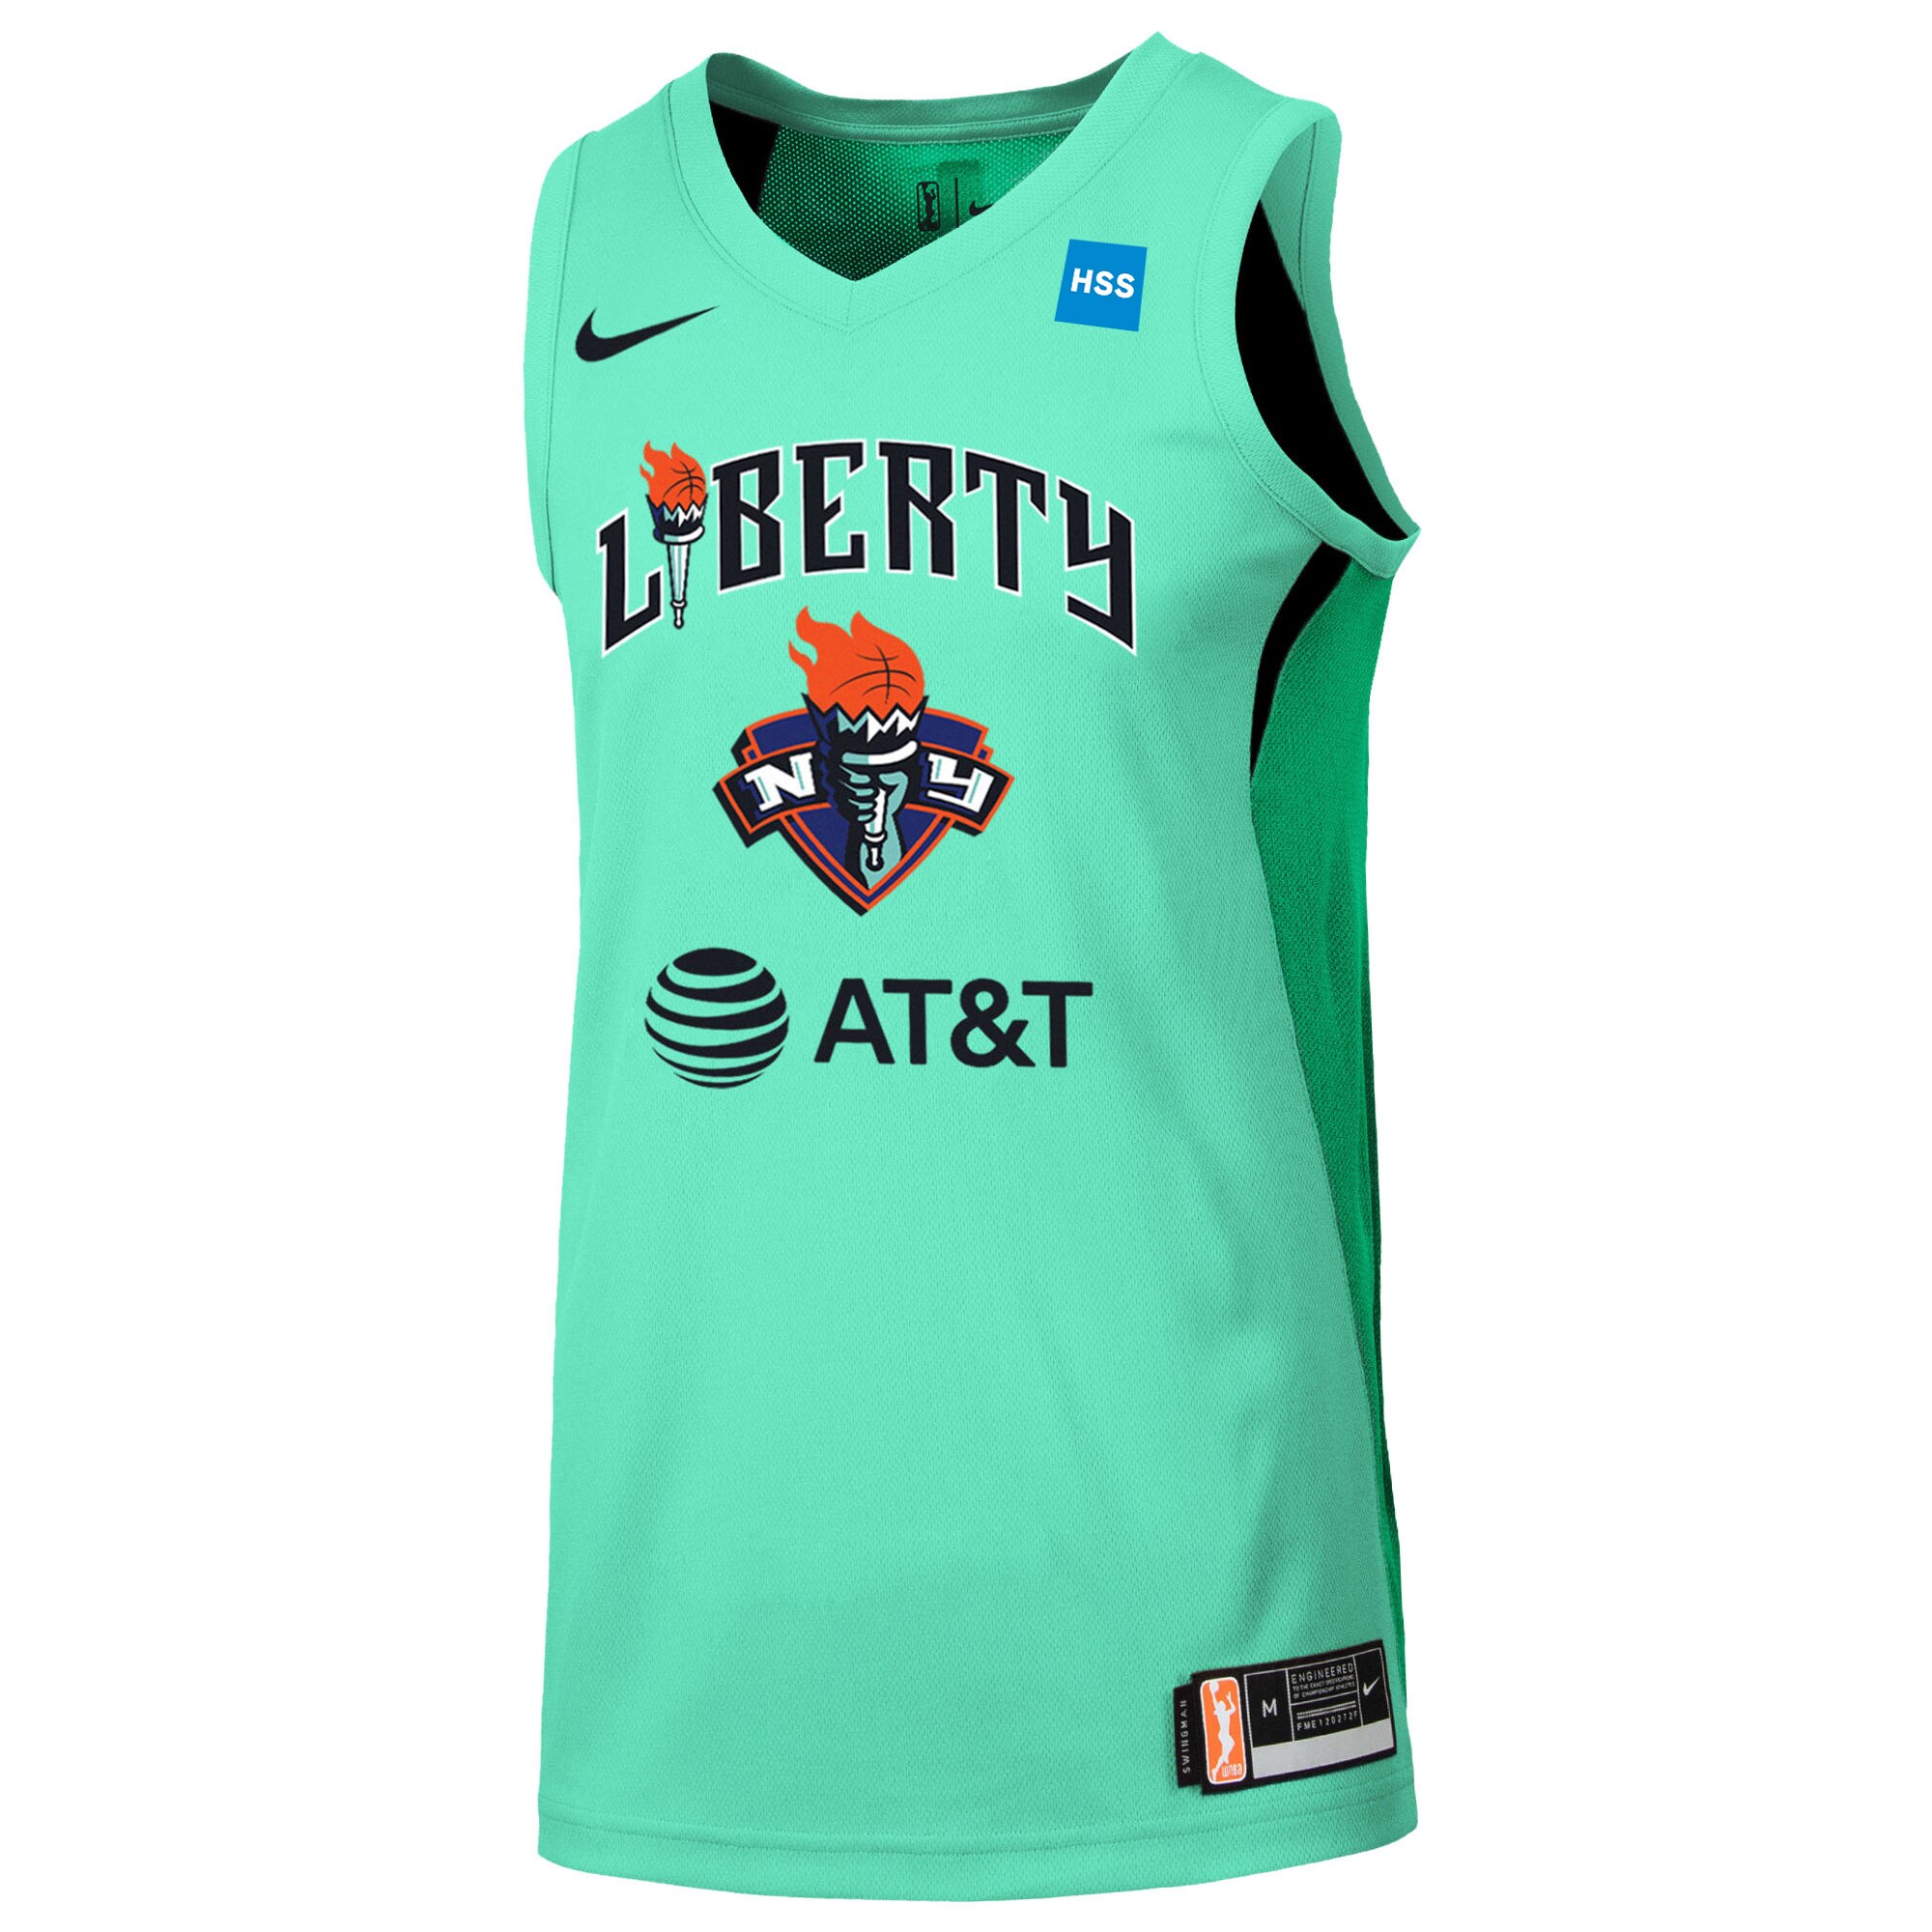 Myles on X: Early last season, it was difficult to find New York Liberty  jerseys in the team store if you were looking to rep someone other than Sabrina  Ionescu. By year's